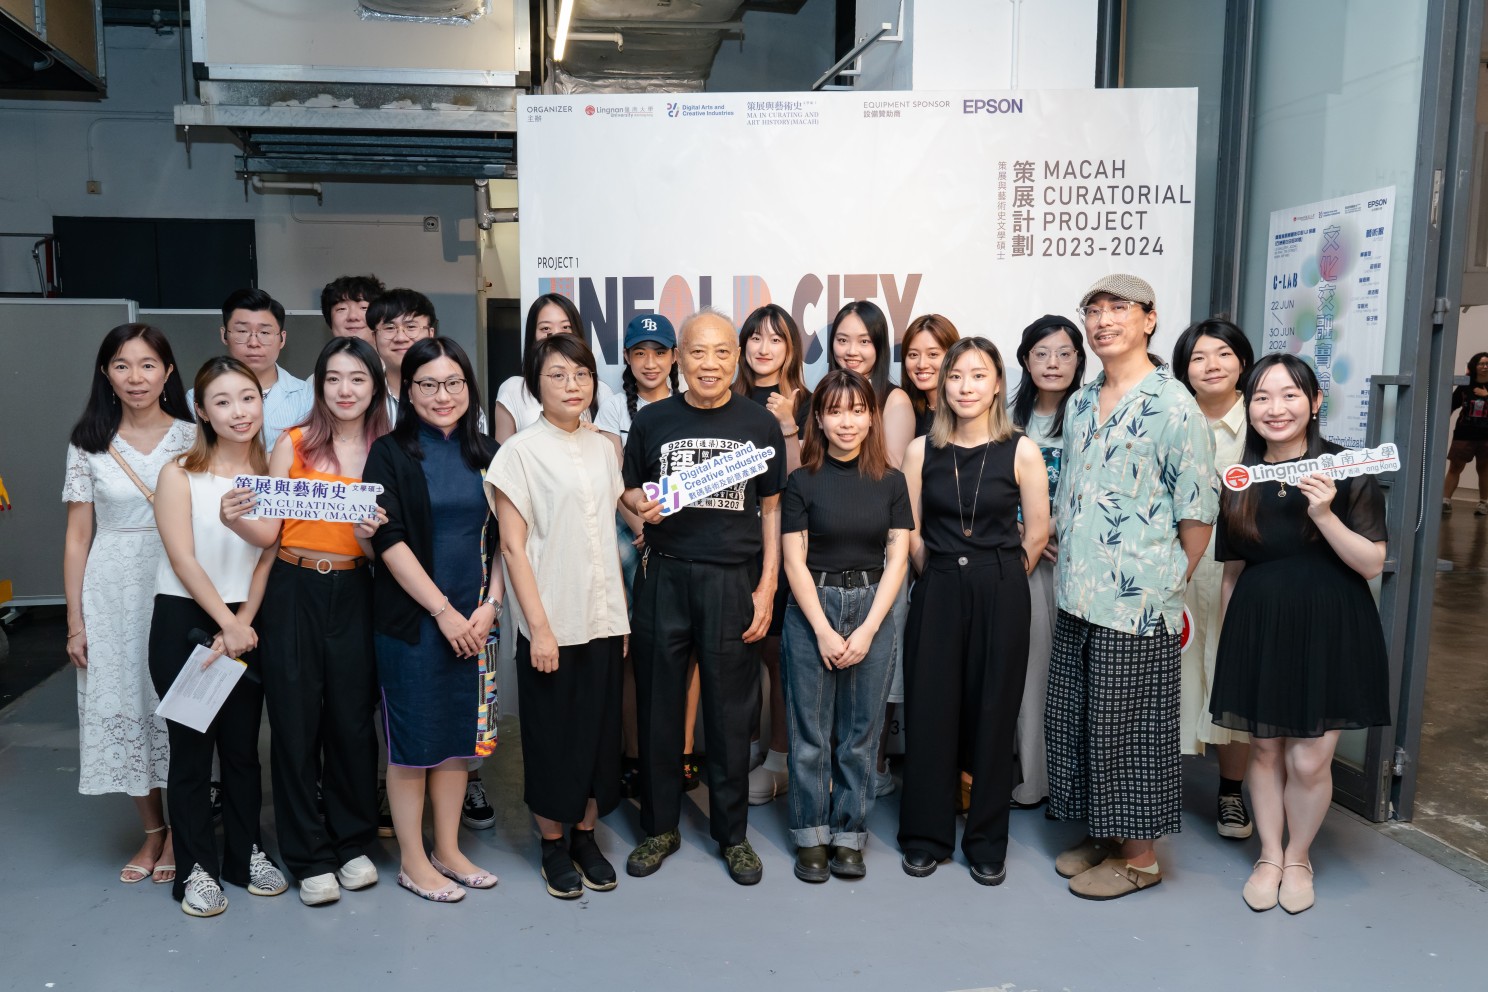 Group photo of DACI faculty members, student curators and artists